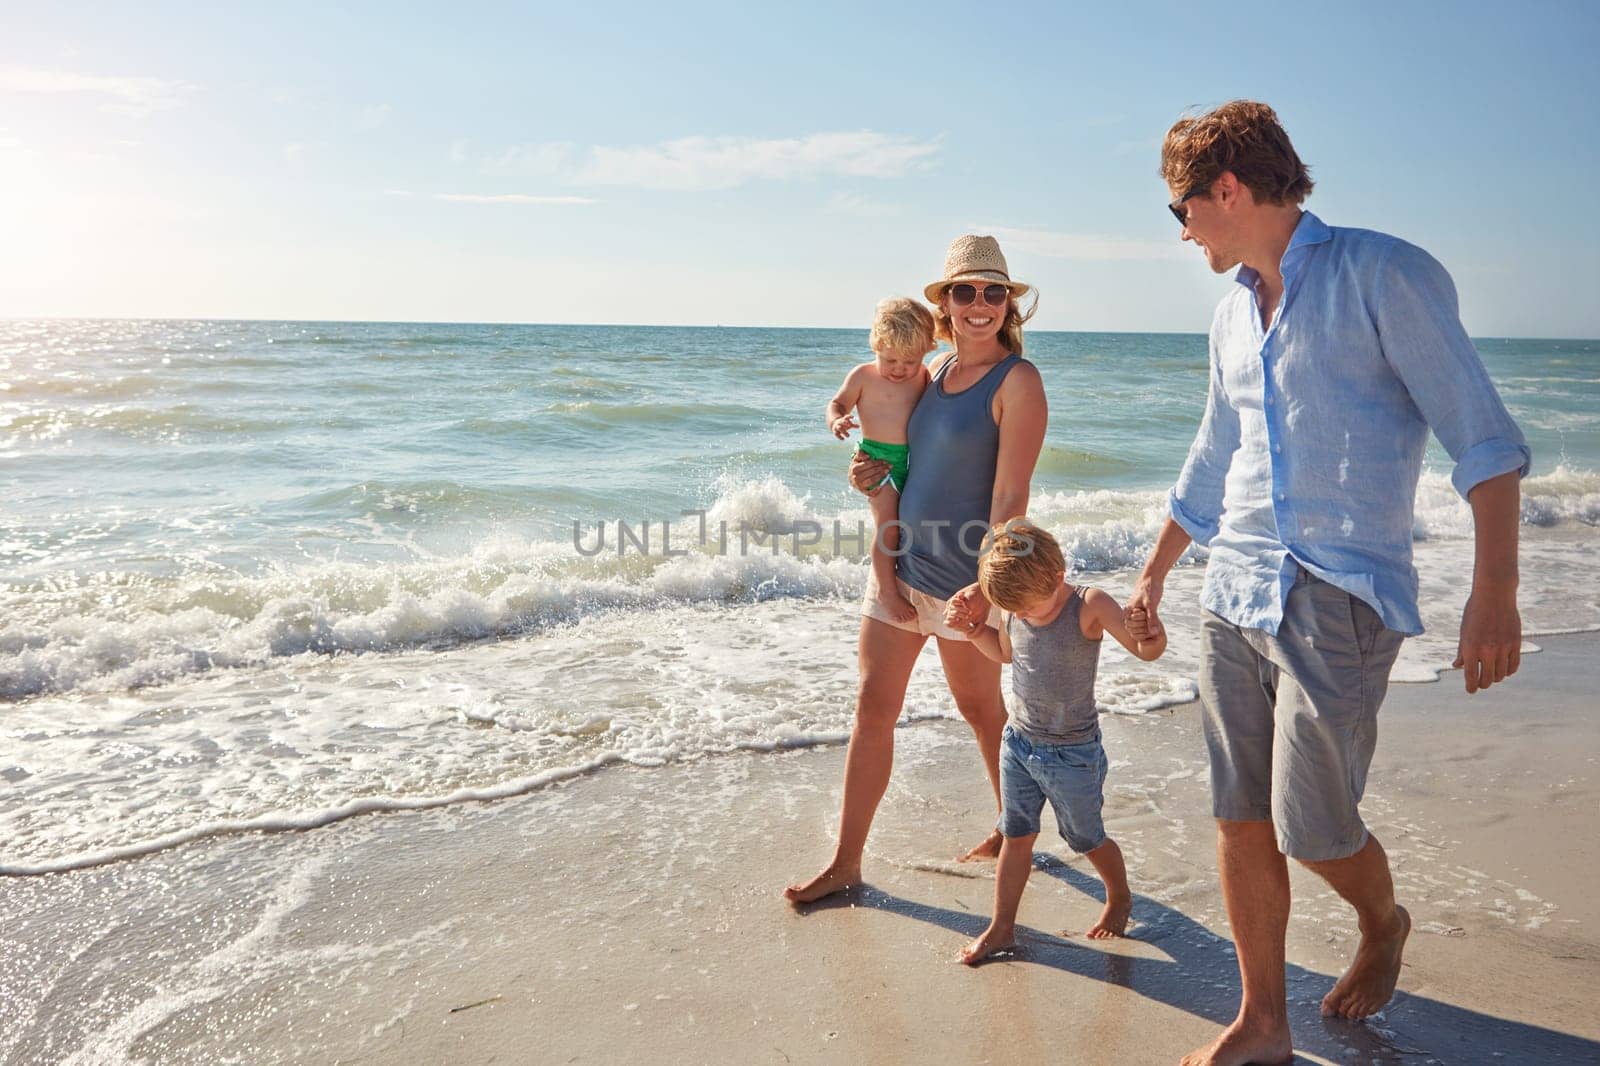 Its beach season. a young family enjoying a summer day out at the beach